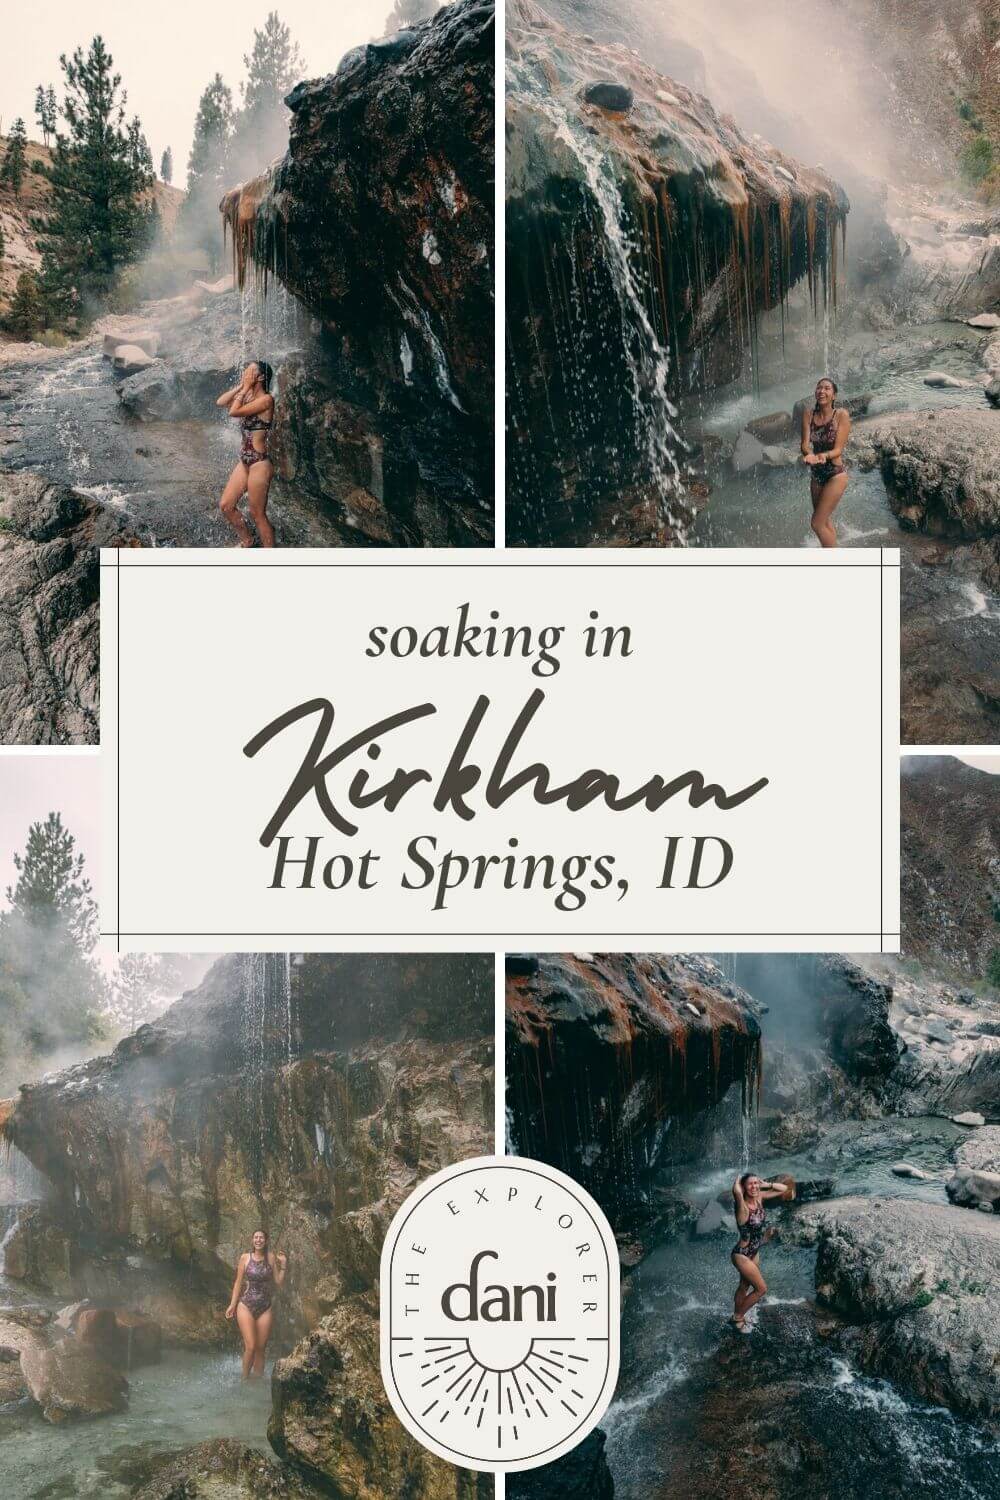 How to Get to and What to Expect at Kirkham Hot Springs Idaho